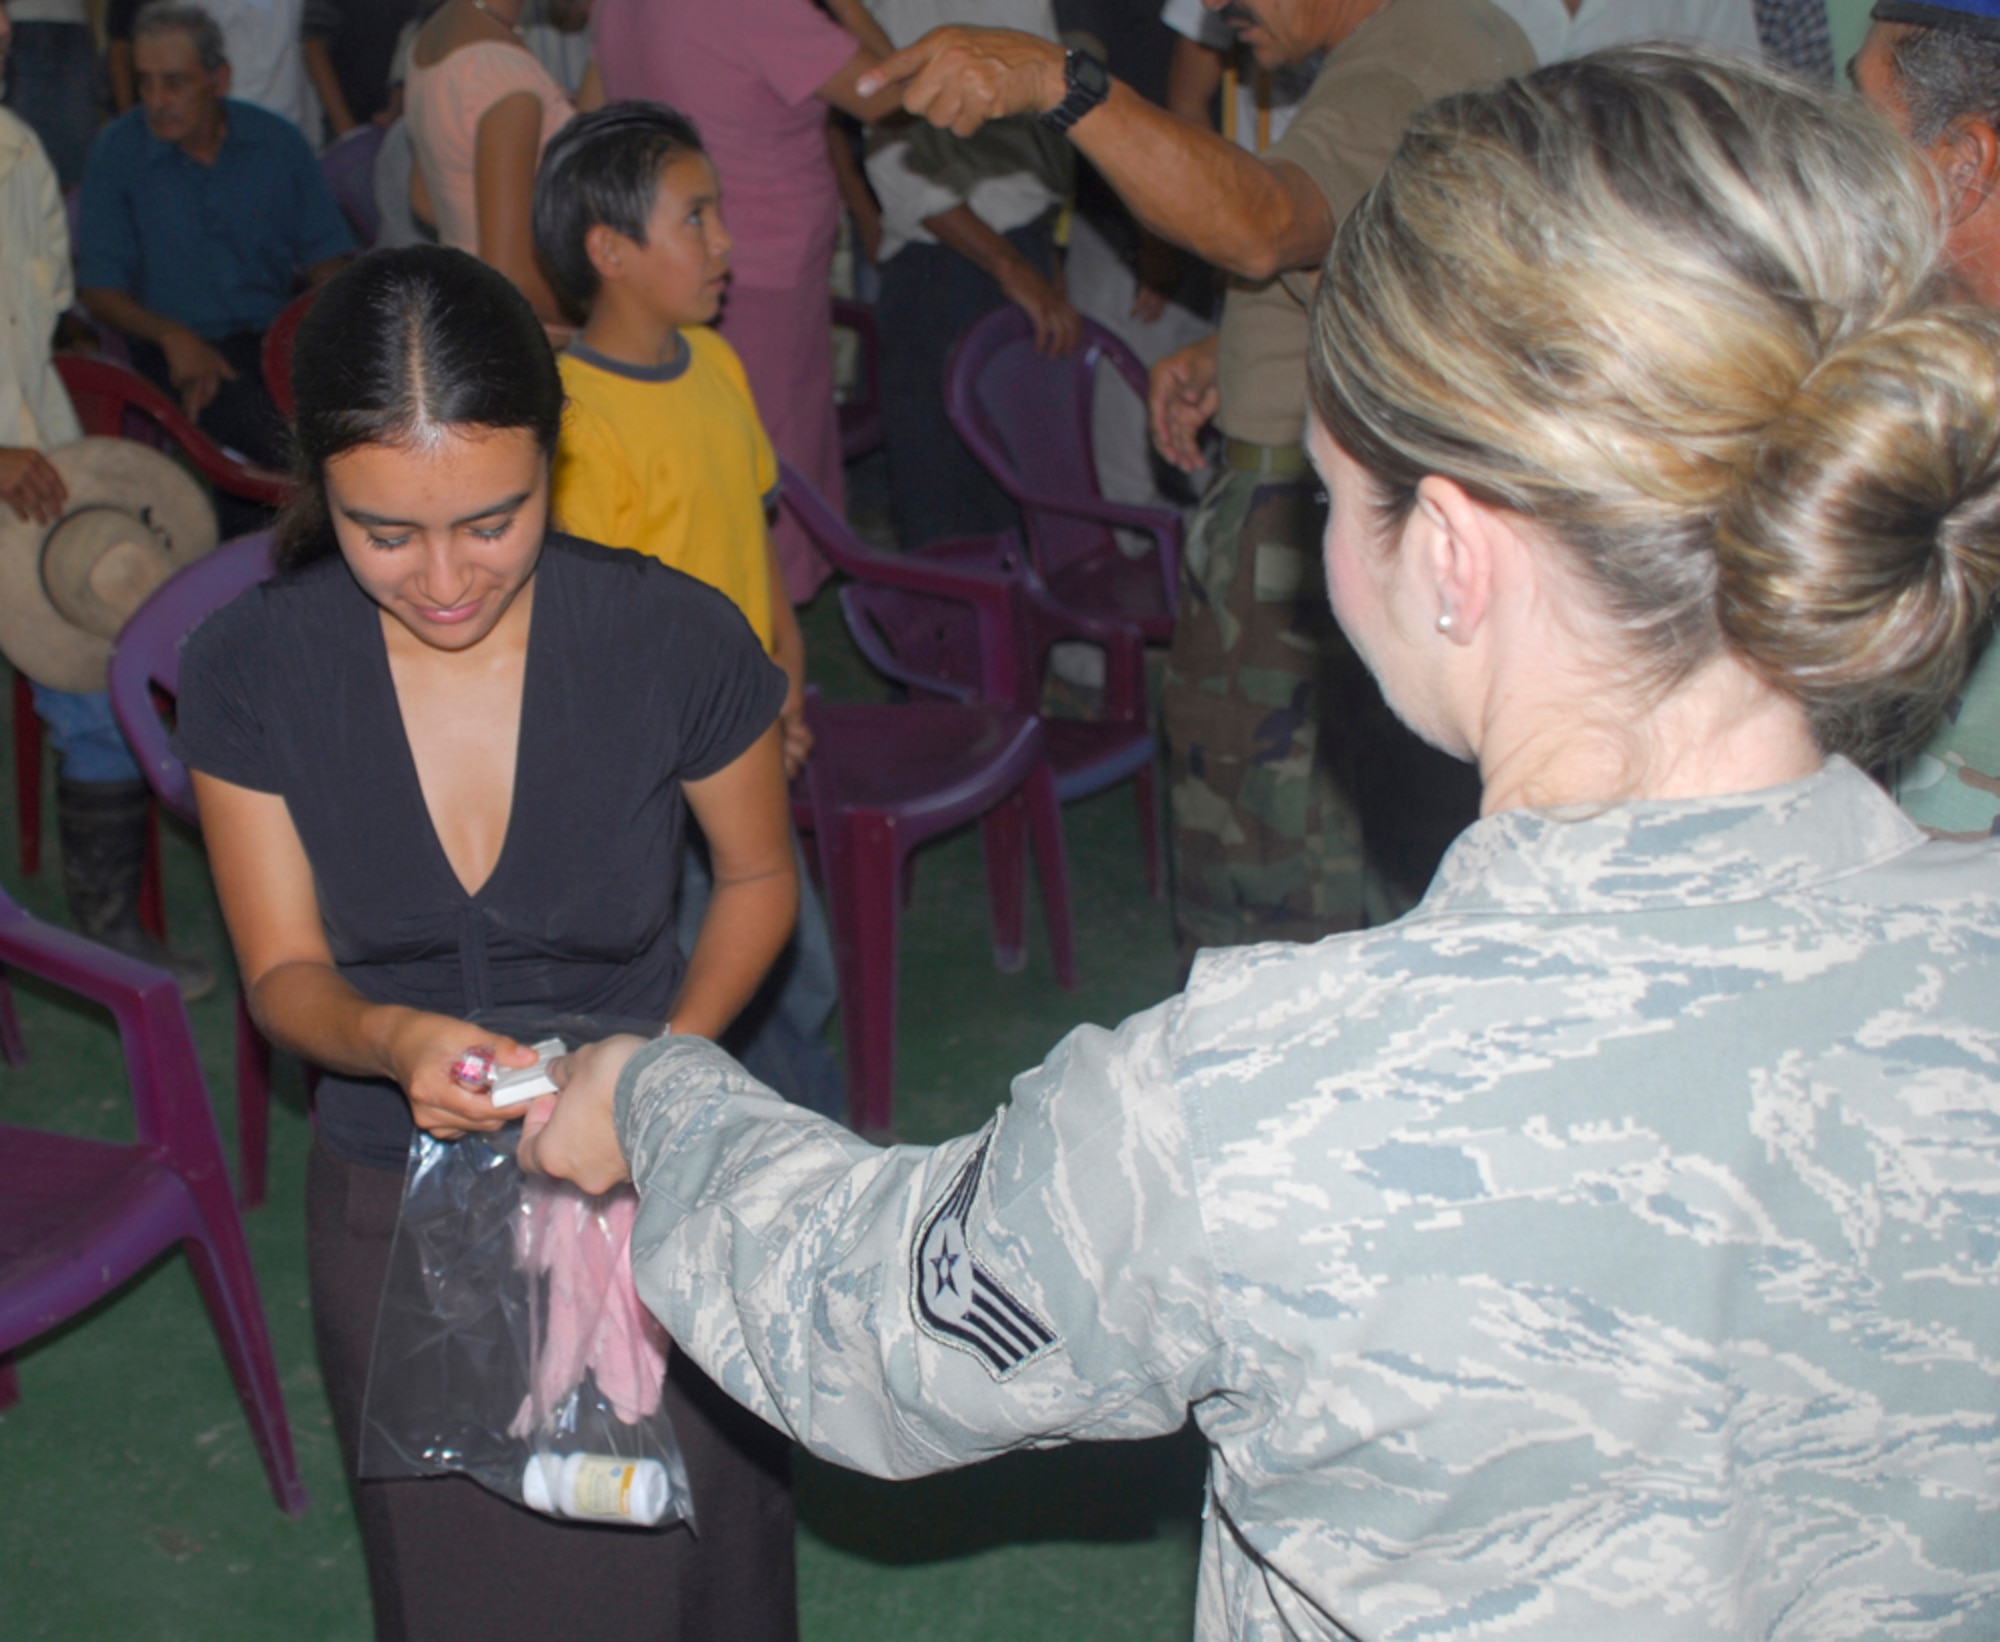 SANTA BARBARA, Honduras - Air force Staff Sgt. Jennifer Kiemel, Joint Task Force-Bravo Medical Element, hands out soap to people who attended a medical readiness training exercise in San Antonio De Canada, Honduras, July 25. Among the services provided at the MEDRETE were preventive medicine, health screening, a provider visit and cancer screening. Sergeant Kiemel is deployed from Travis Air Force Base, Calif.